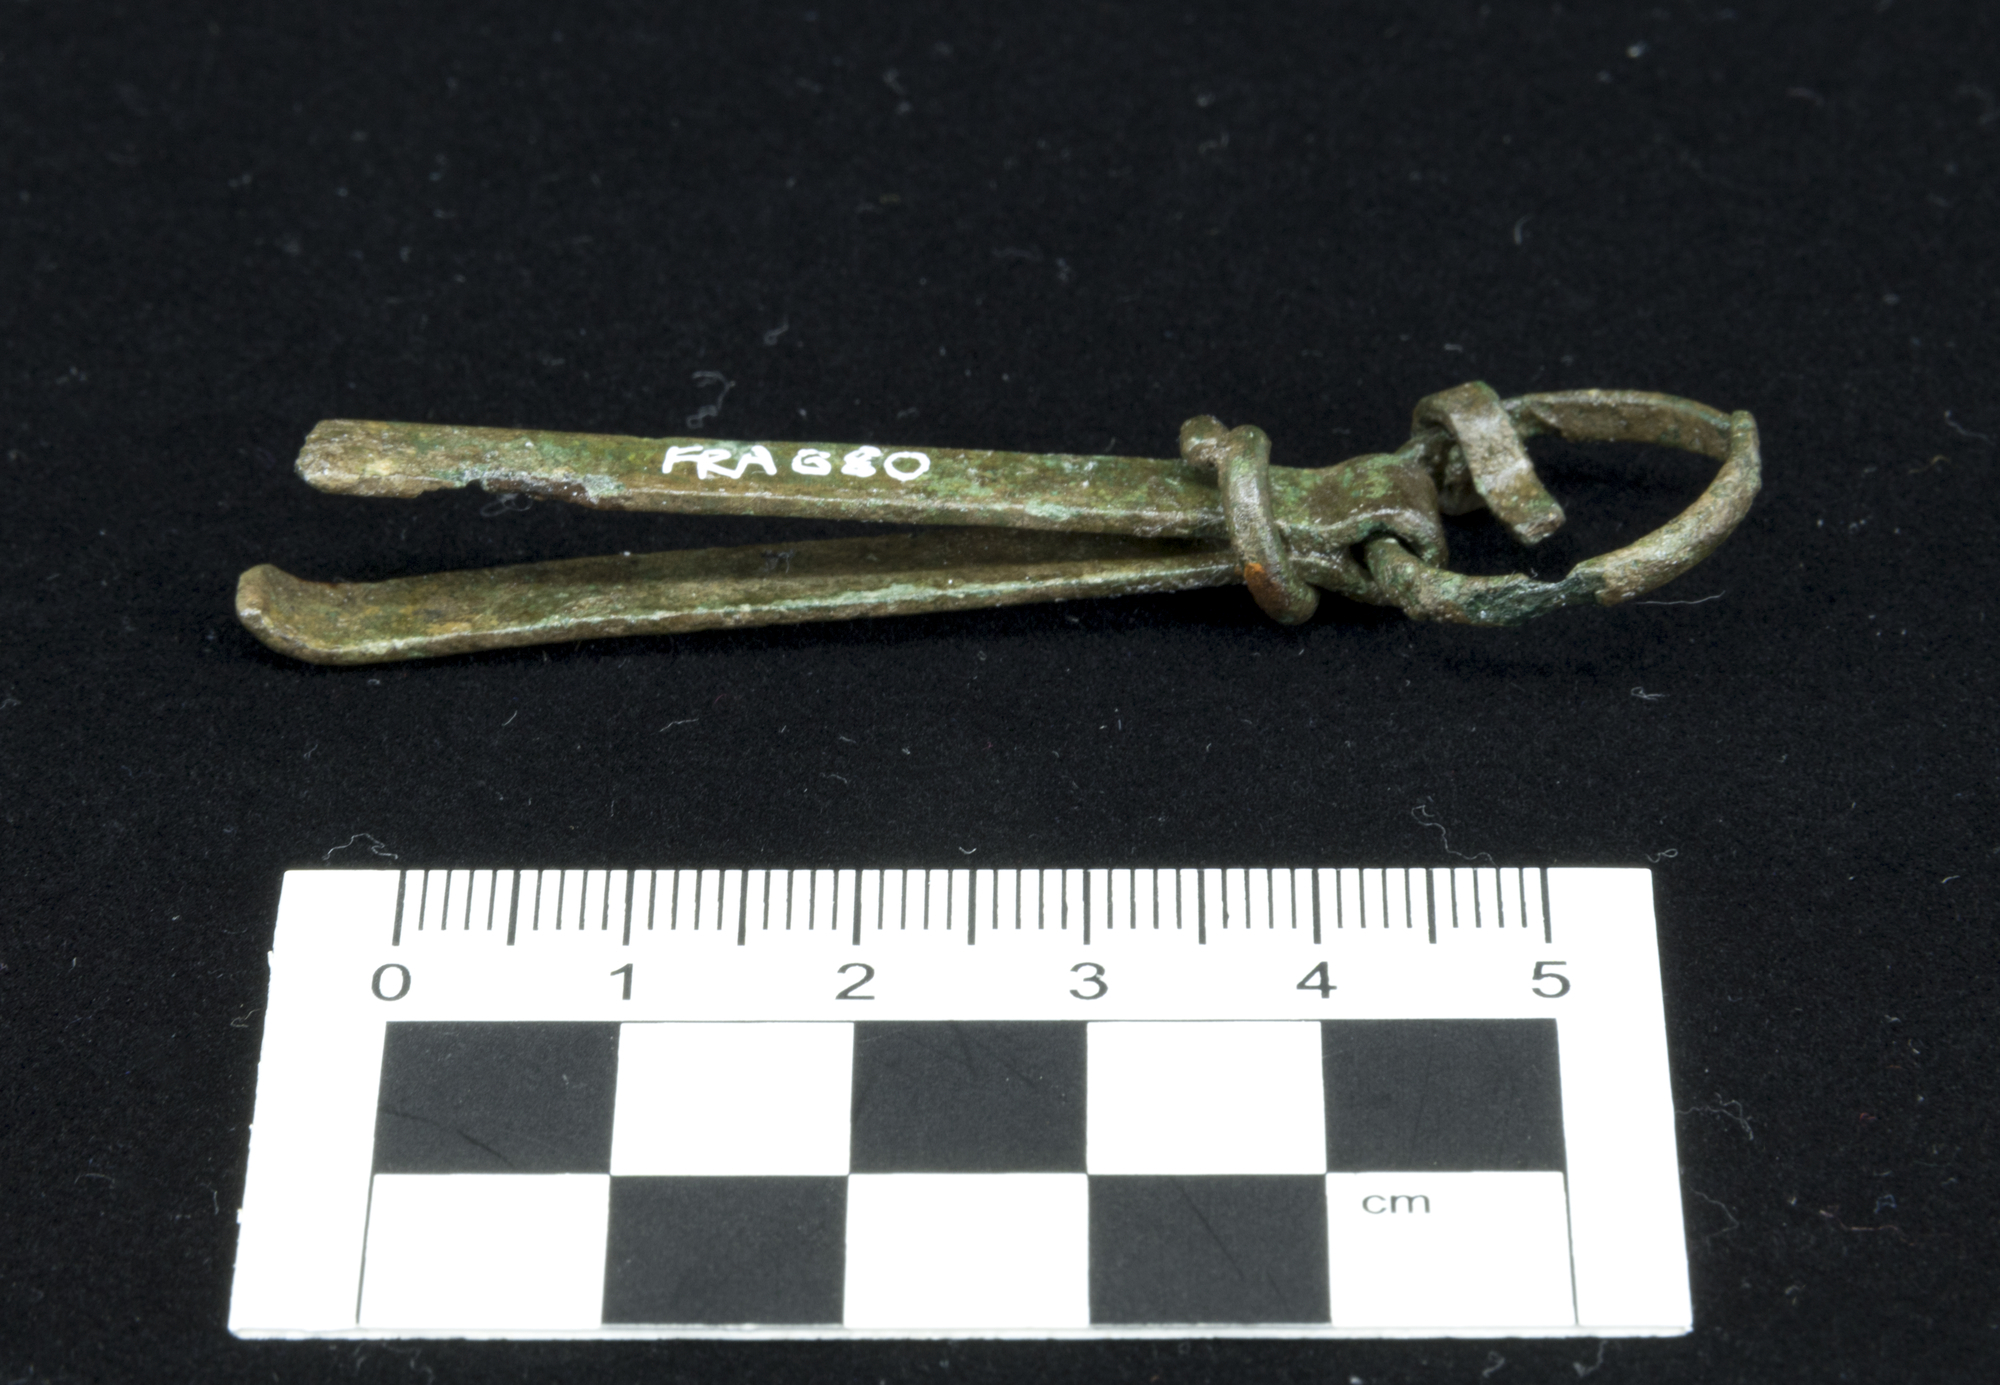 Image of Pair of tweezers on a ring, from the Roman site at Newstead © National Museums Scotland